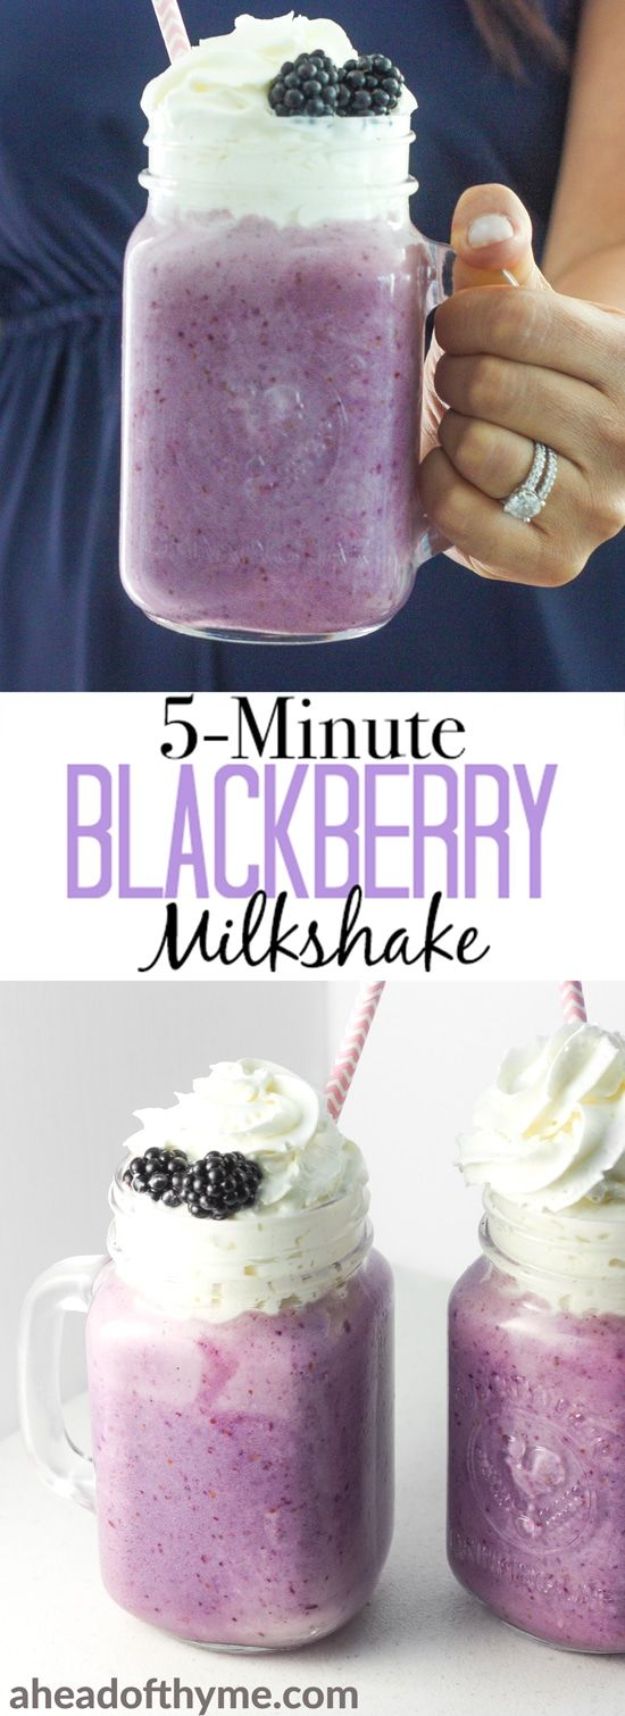 Quick Dessert Recipes - 5-Minute Blackberry Milkshake Recipe - Fast Desserts to Make In Minutes - Sweet Treats, Cookies, Cake and Snack Ideas